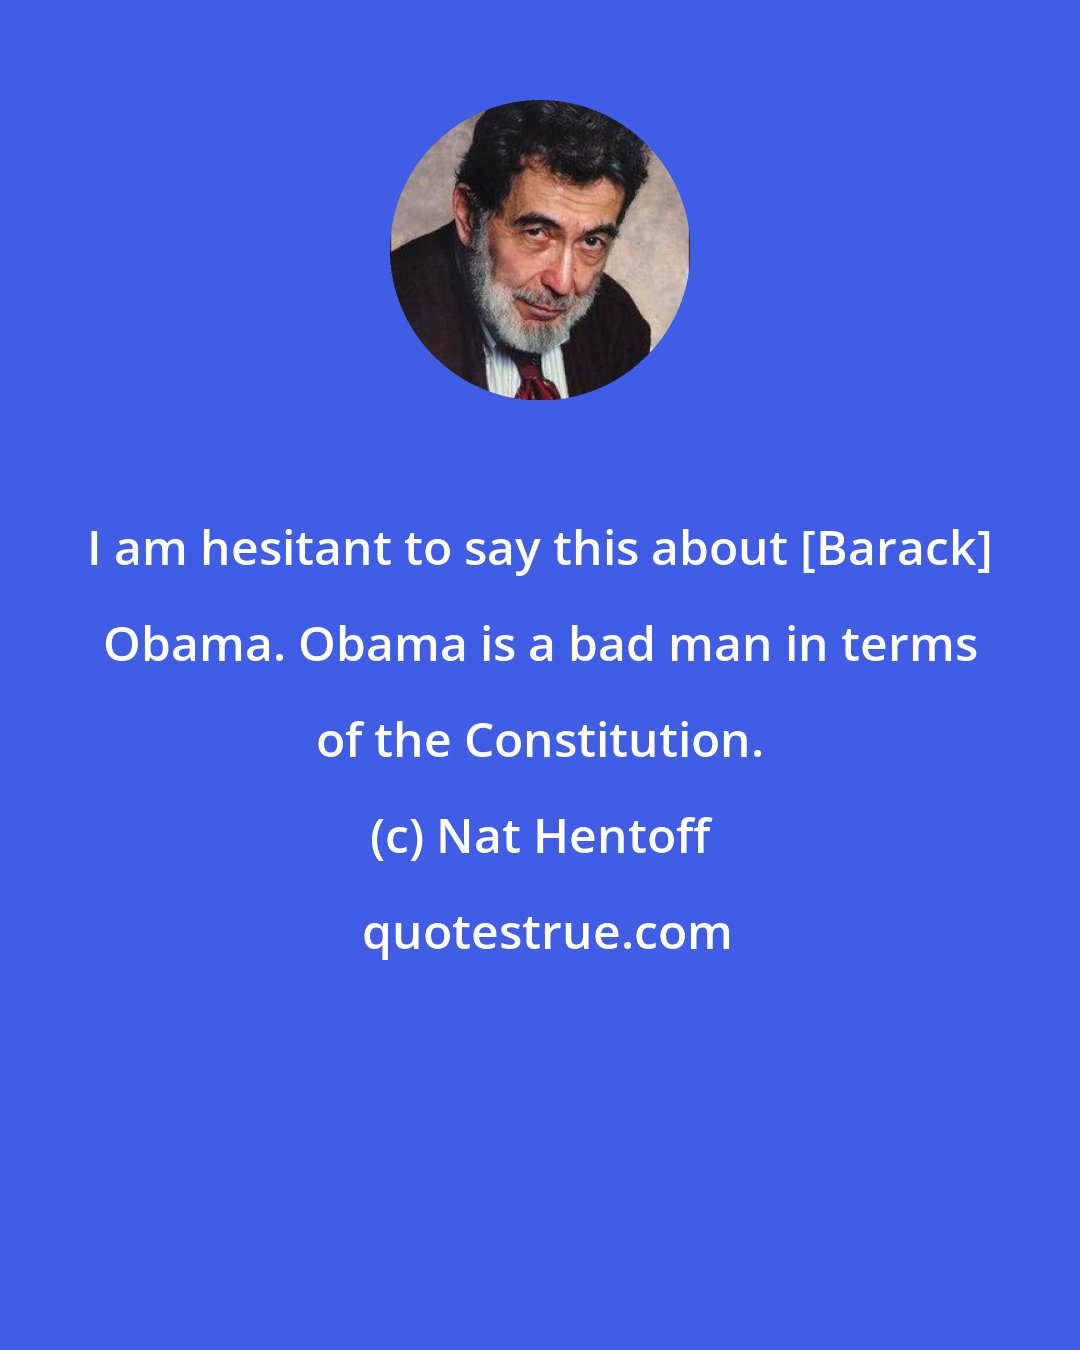 Nat Hentoff: I am hesitant to say this about [Barack] Obama. Obama is a bad man in terms of the Constitution.